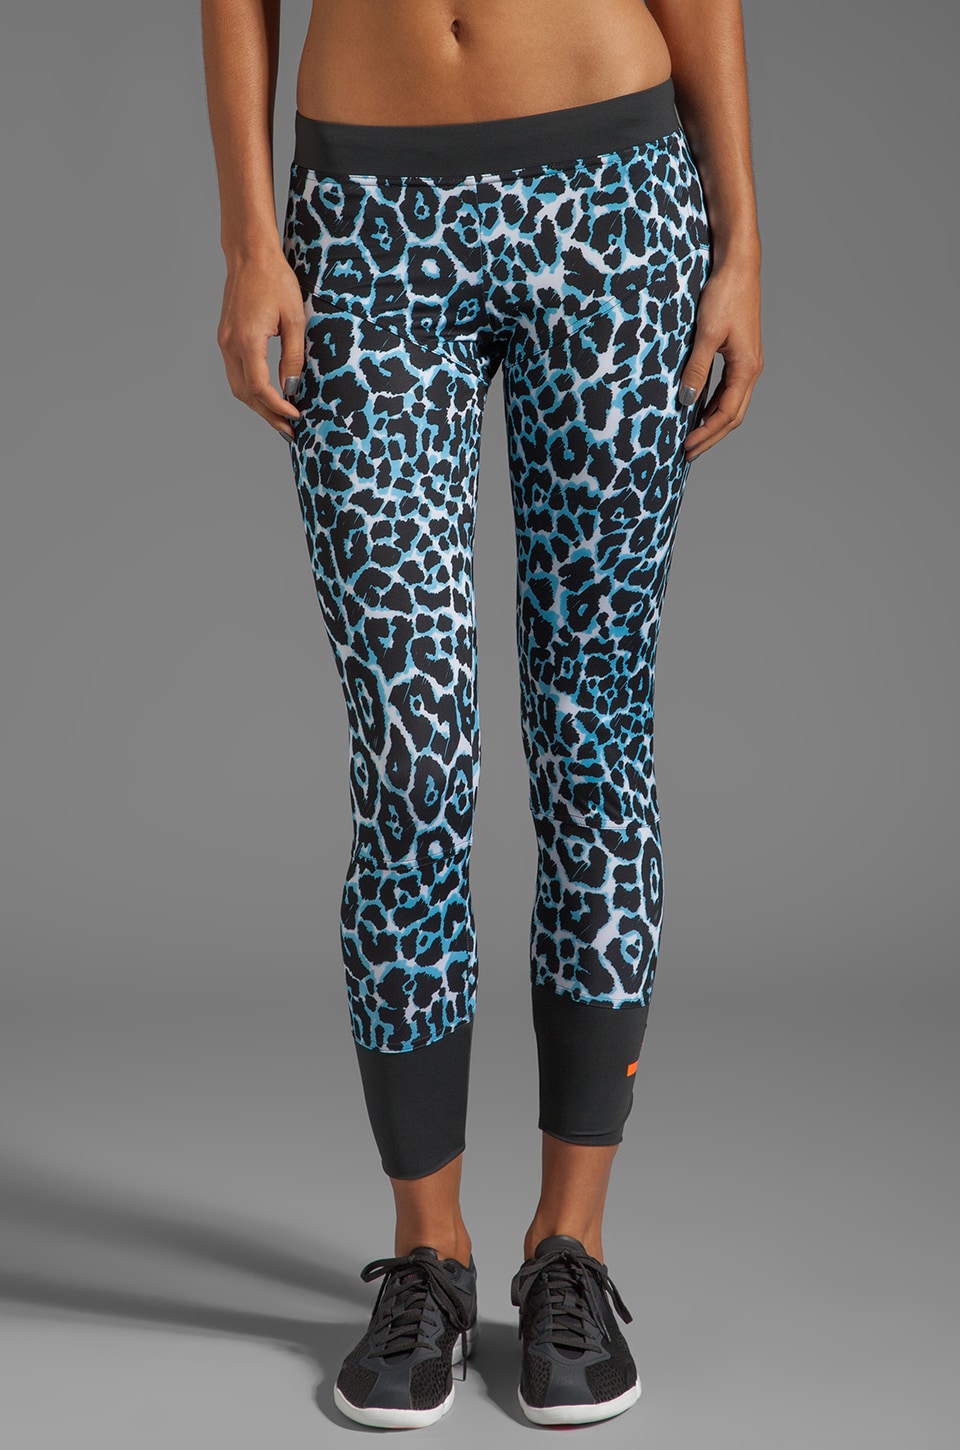 Peave Ass jacht adidas by Stella McCartney Stu Long Tight A Legging in White & Black &  Waterblue | REVOLVE